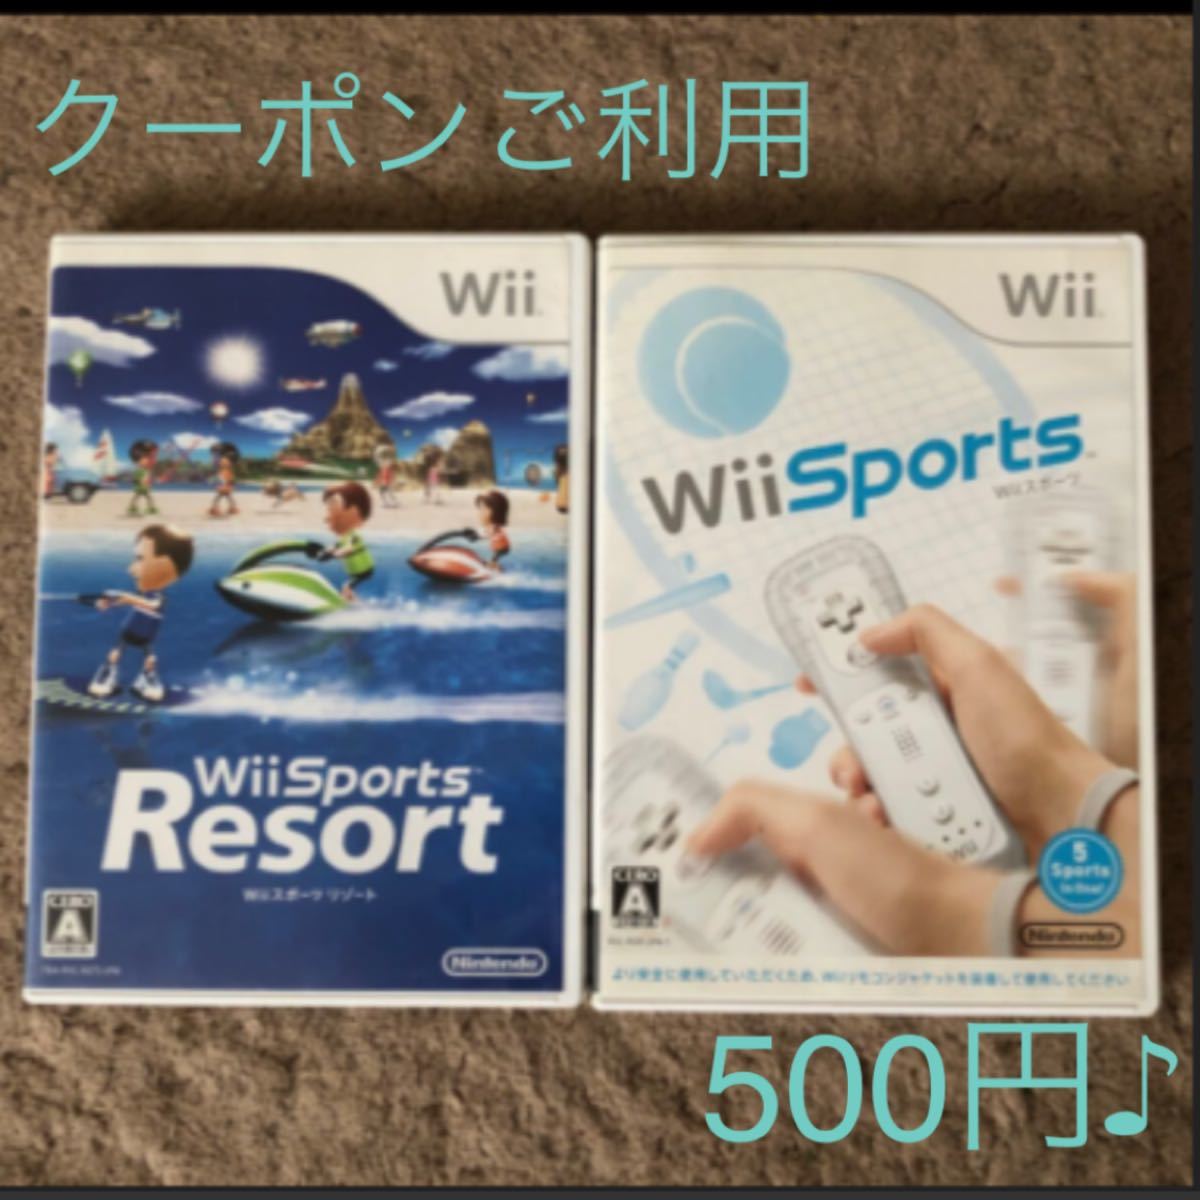 wiiソフト＊スポーツ＊スポーツリゾート